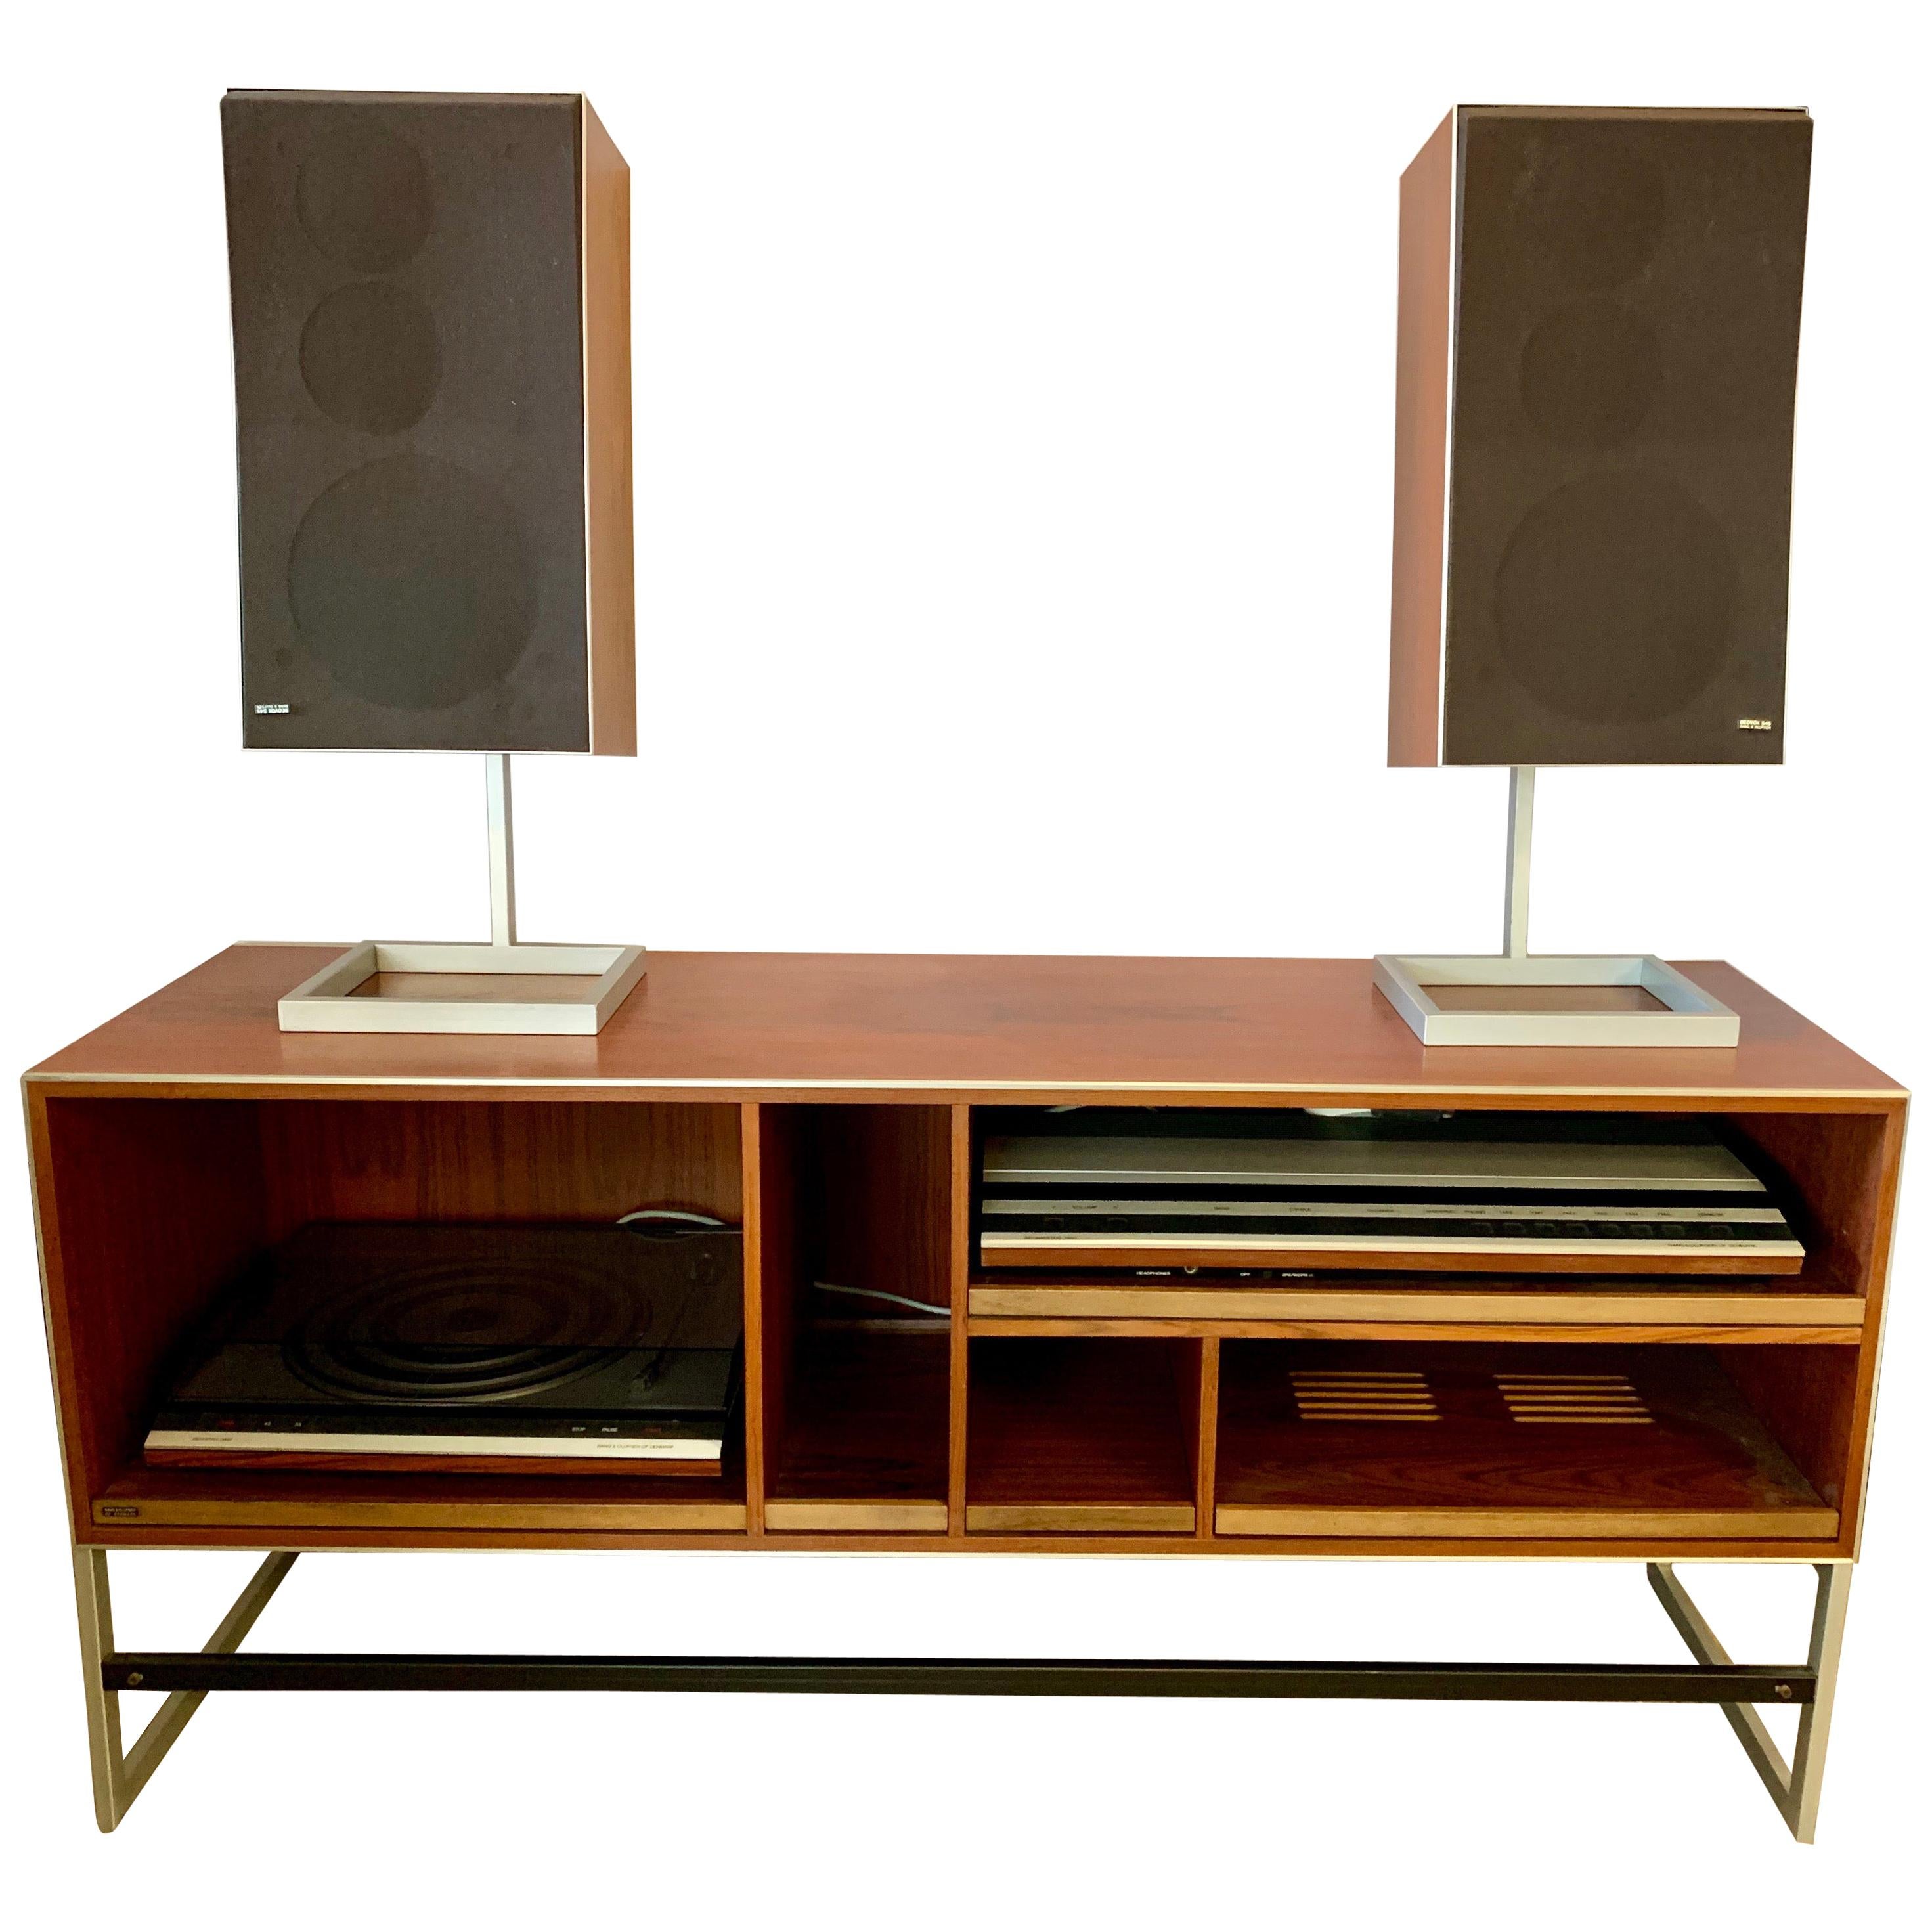 Jacob Jensen for Bang & Olufsen Home Audio System Cabinet with Components